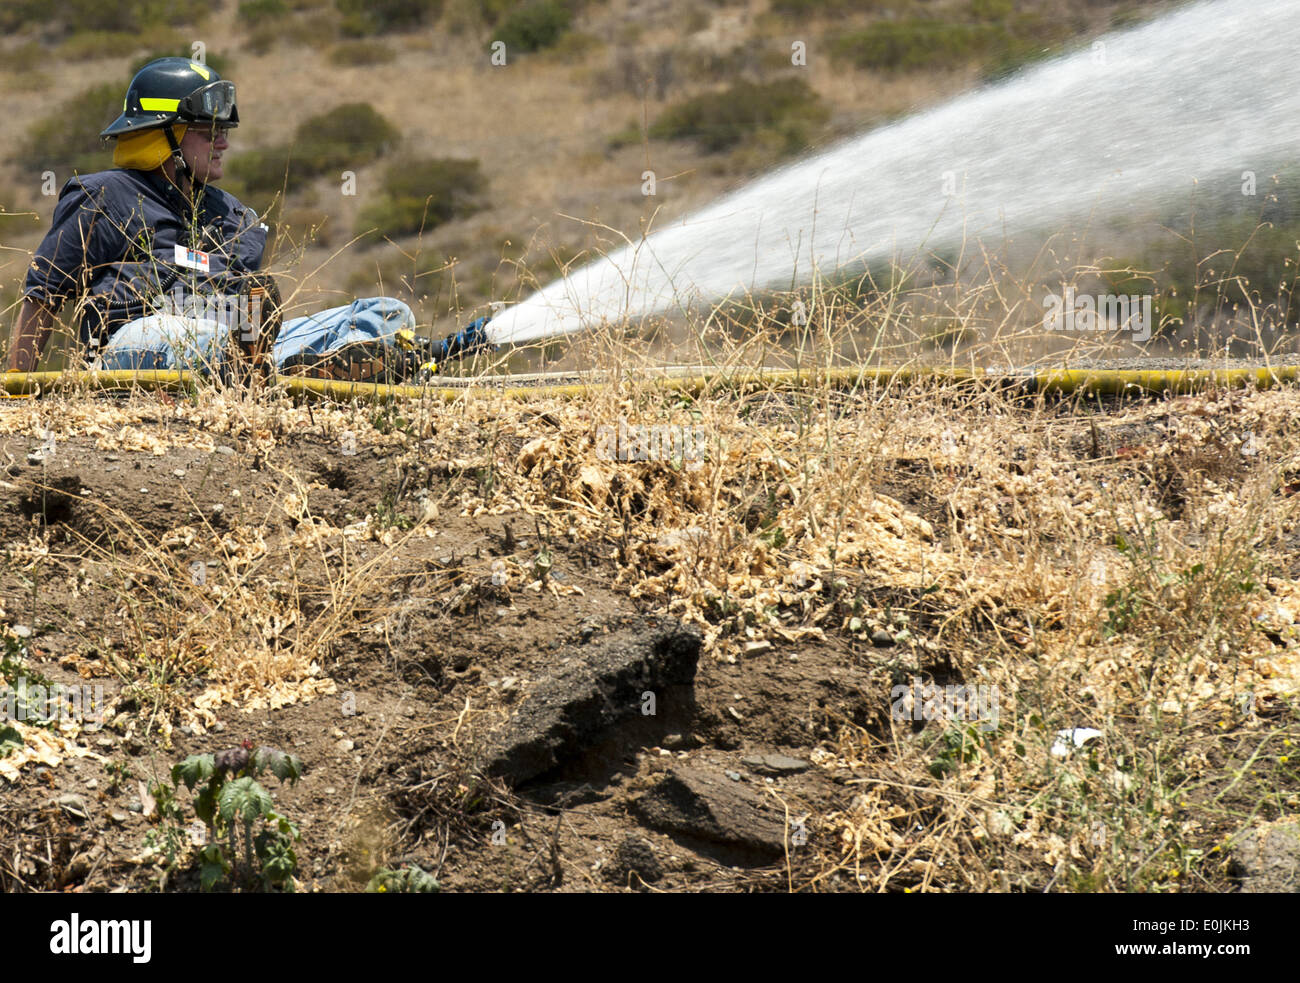 San Onofre, California, USA. 14th May, 2014. A San Onofre Nuclear Generating Station Fire Brigade member wets down vegetation just south of SONGS on Wednesday afternoon. Multiple Fire agencies, including Federal, State and County, responded to a wildfire on at the San Clemente Check Point that began when a truck on the northbound I-5 Freeway caught fire and passed to nearby vegetation on Wednesday morning. The Pendleton West Fire, had north and south bound trafficstopped, along with Amtrak Passenger Train traffic, as firefighters fought to contain the 150 plus acre fire that included water Stock Photo